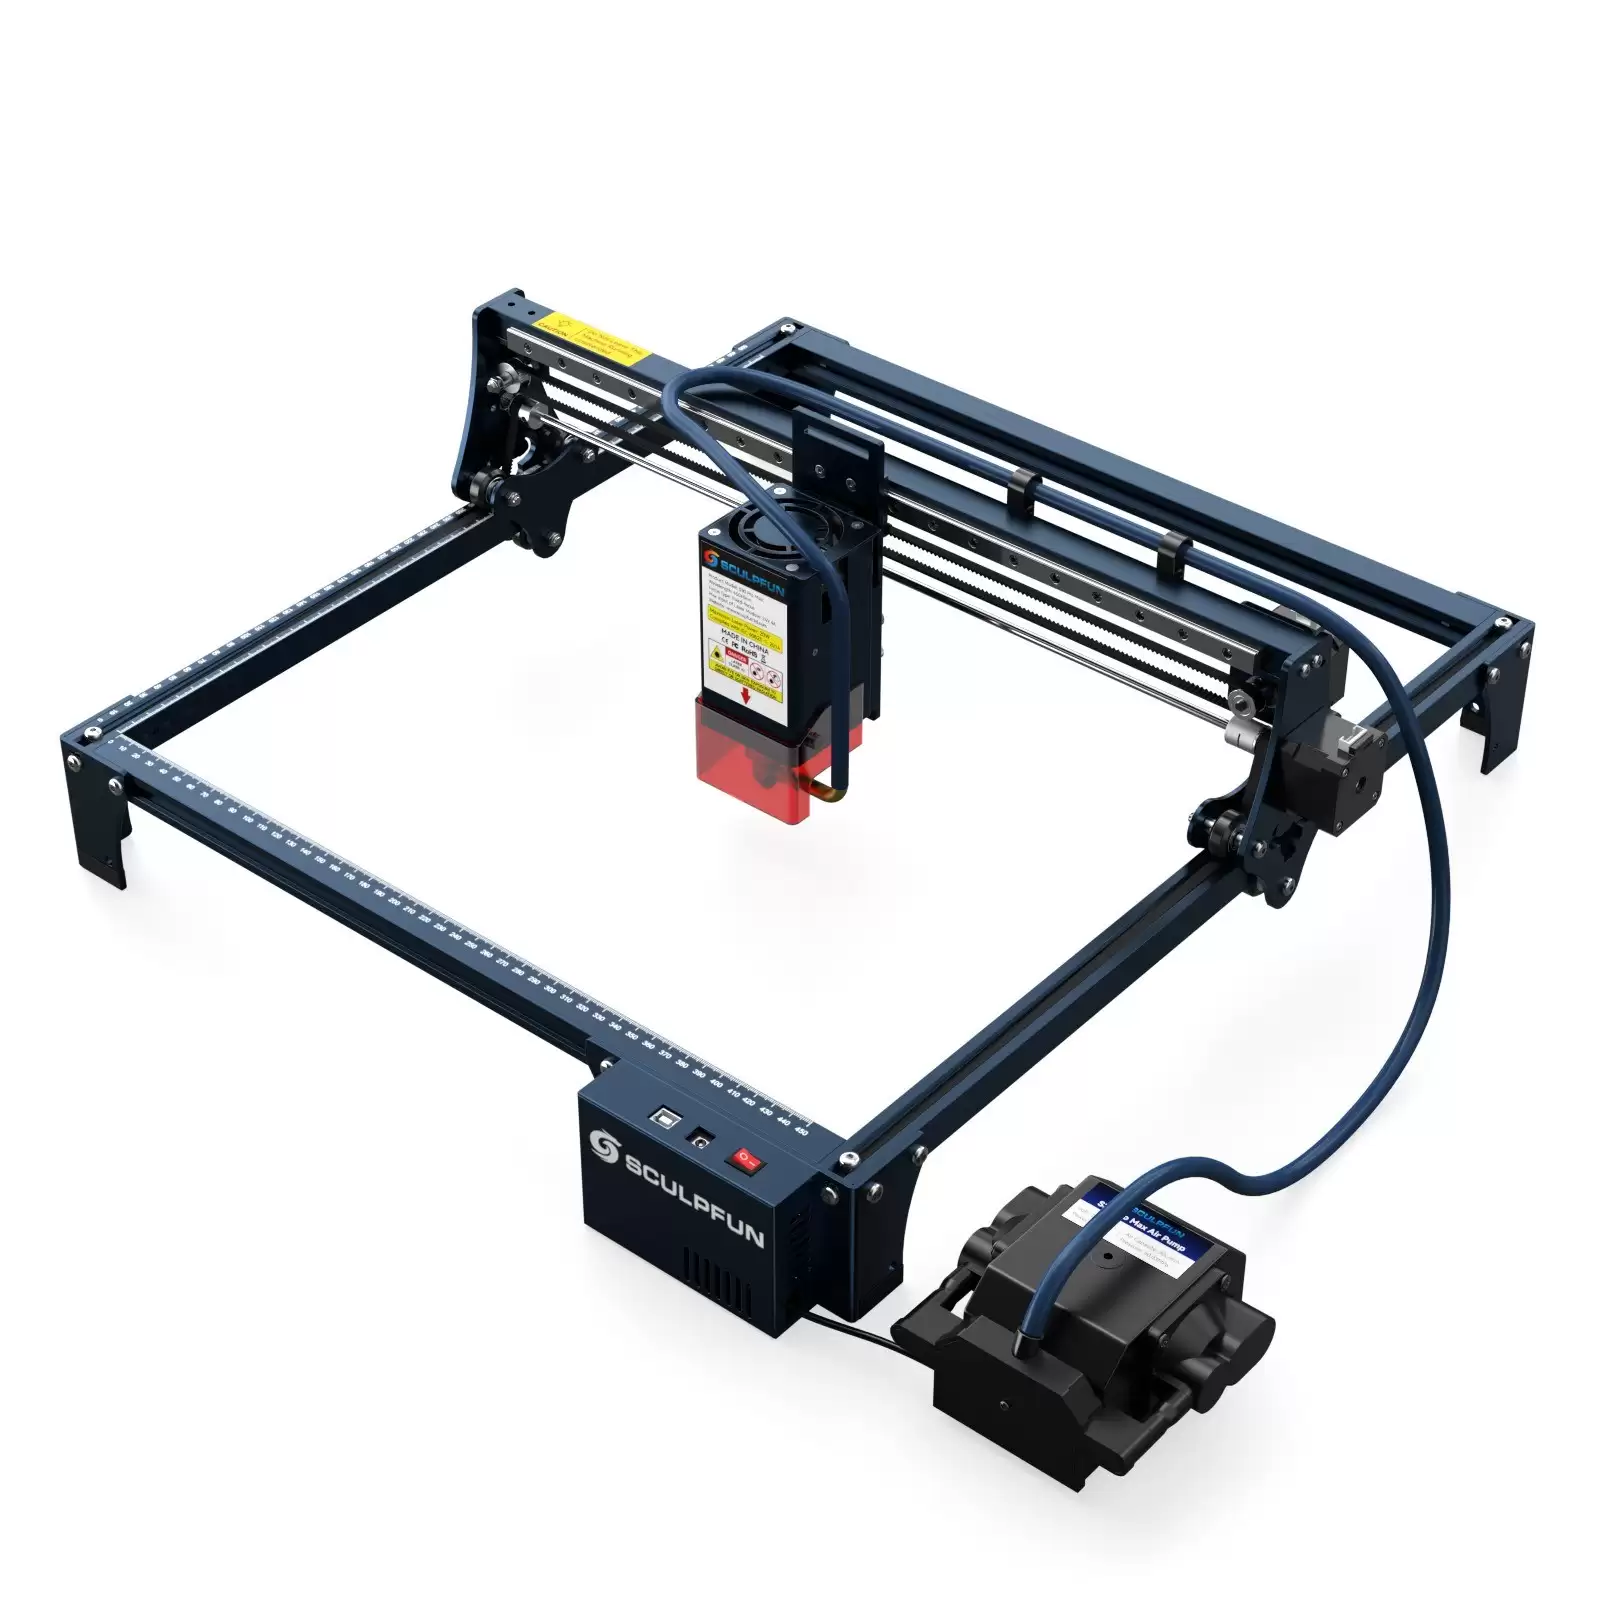 Order In Just Mx$10266 Sculpfun S30 Pro Max 20w Laser Engraver With Automatic Air-Assist System With This Discount Coupon At Tomtop